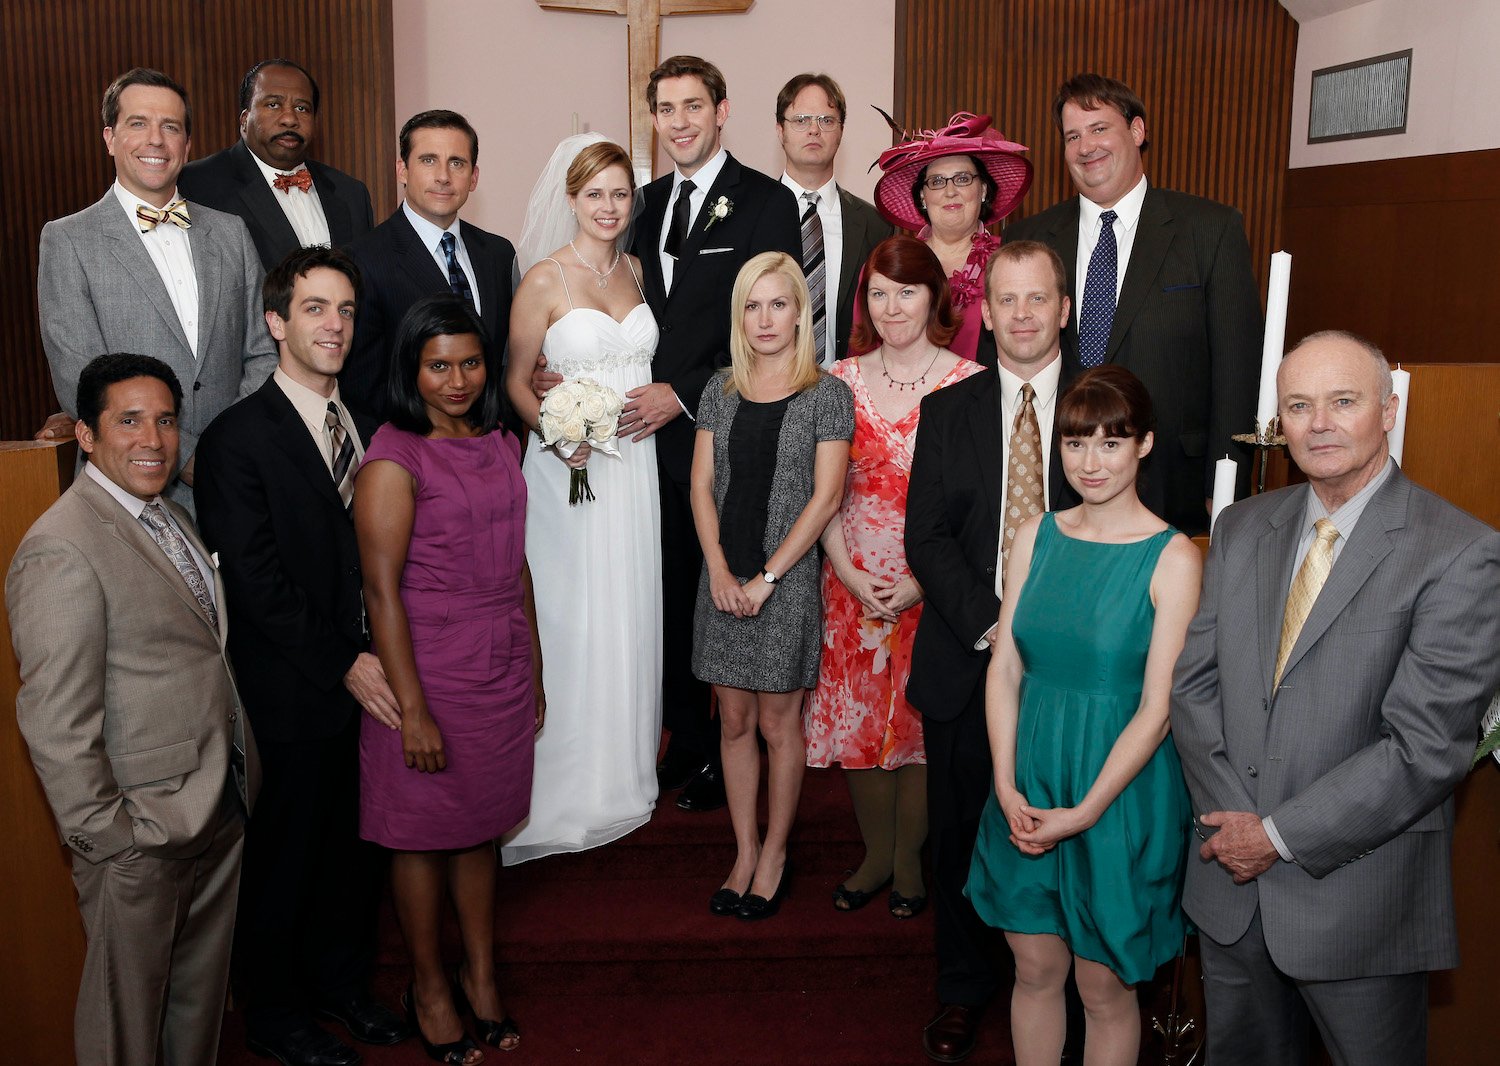 The cast of 'The Office' season 6 Jim and Pam wedding